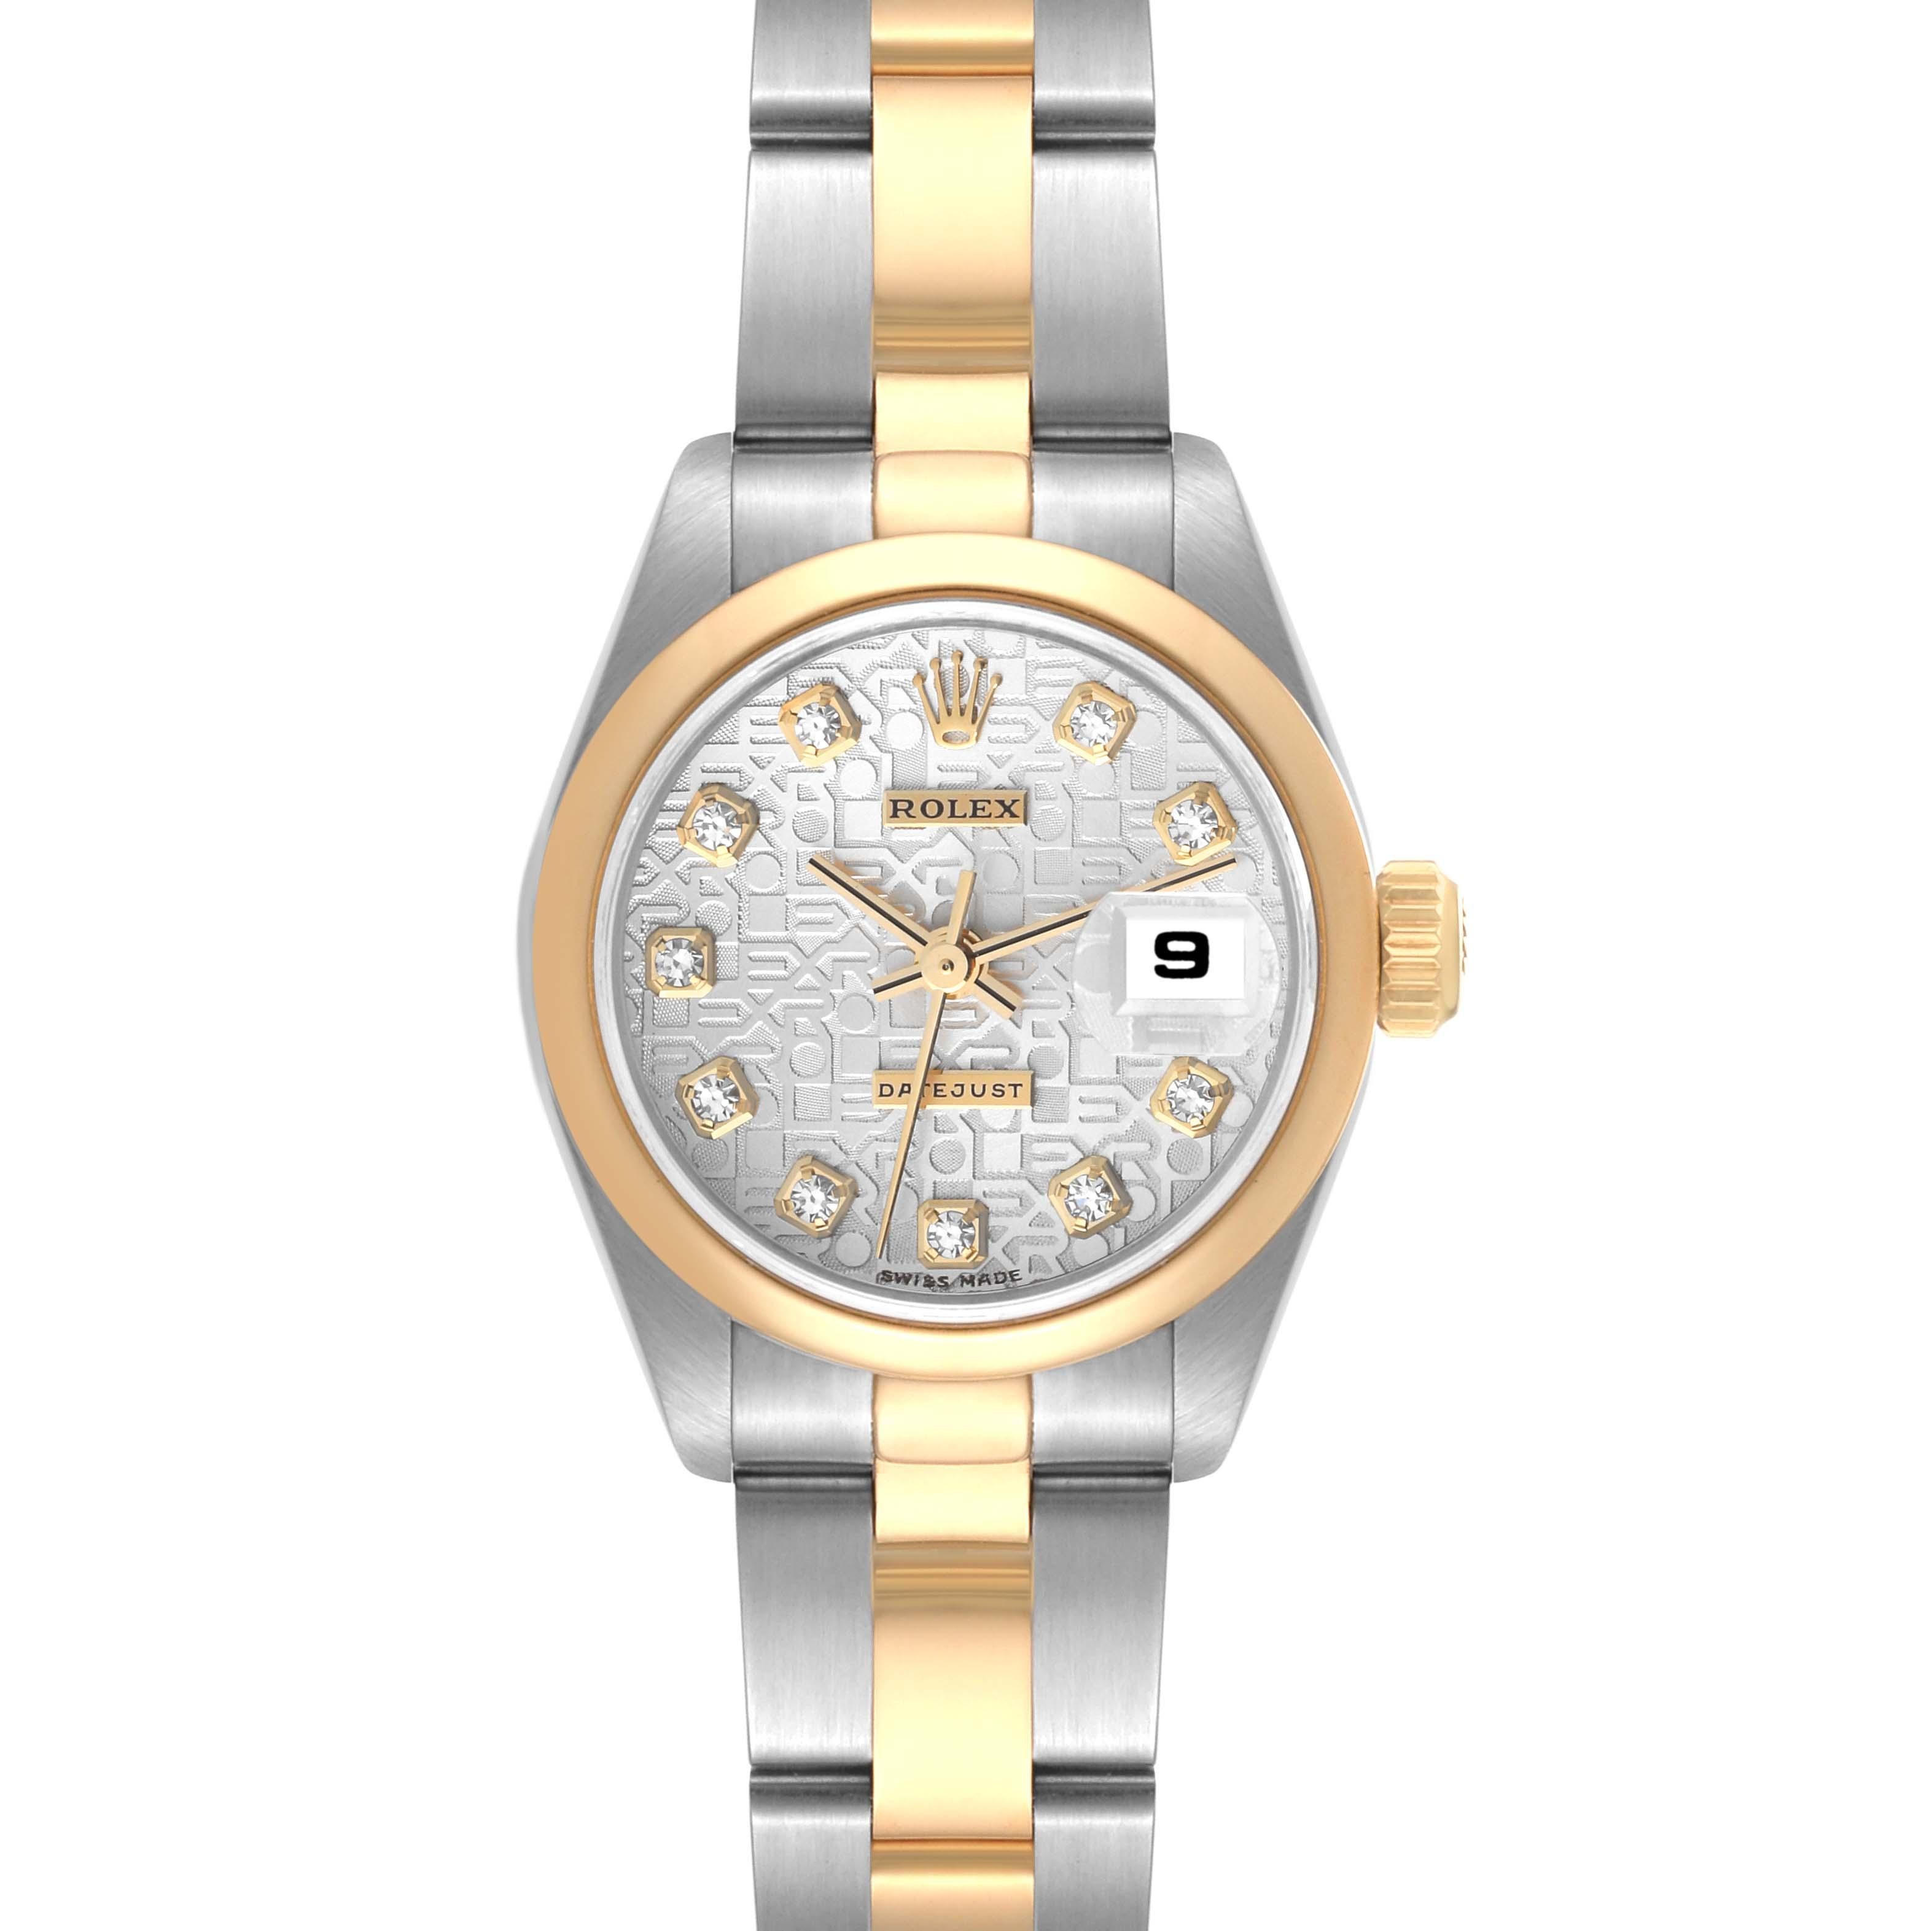 Rolex Datejust Steel Yellow Gold Diamond Anniversary Dial Ladies Watch 69163. Officially certified chronometer self-winding movement. Stainless steel oyster case 26 mm in diameter. Rolex logo on a 18K yellow gold crown. 18k yellow gold smooth domed